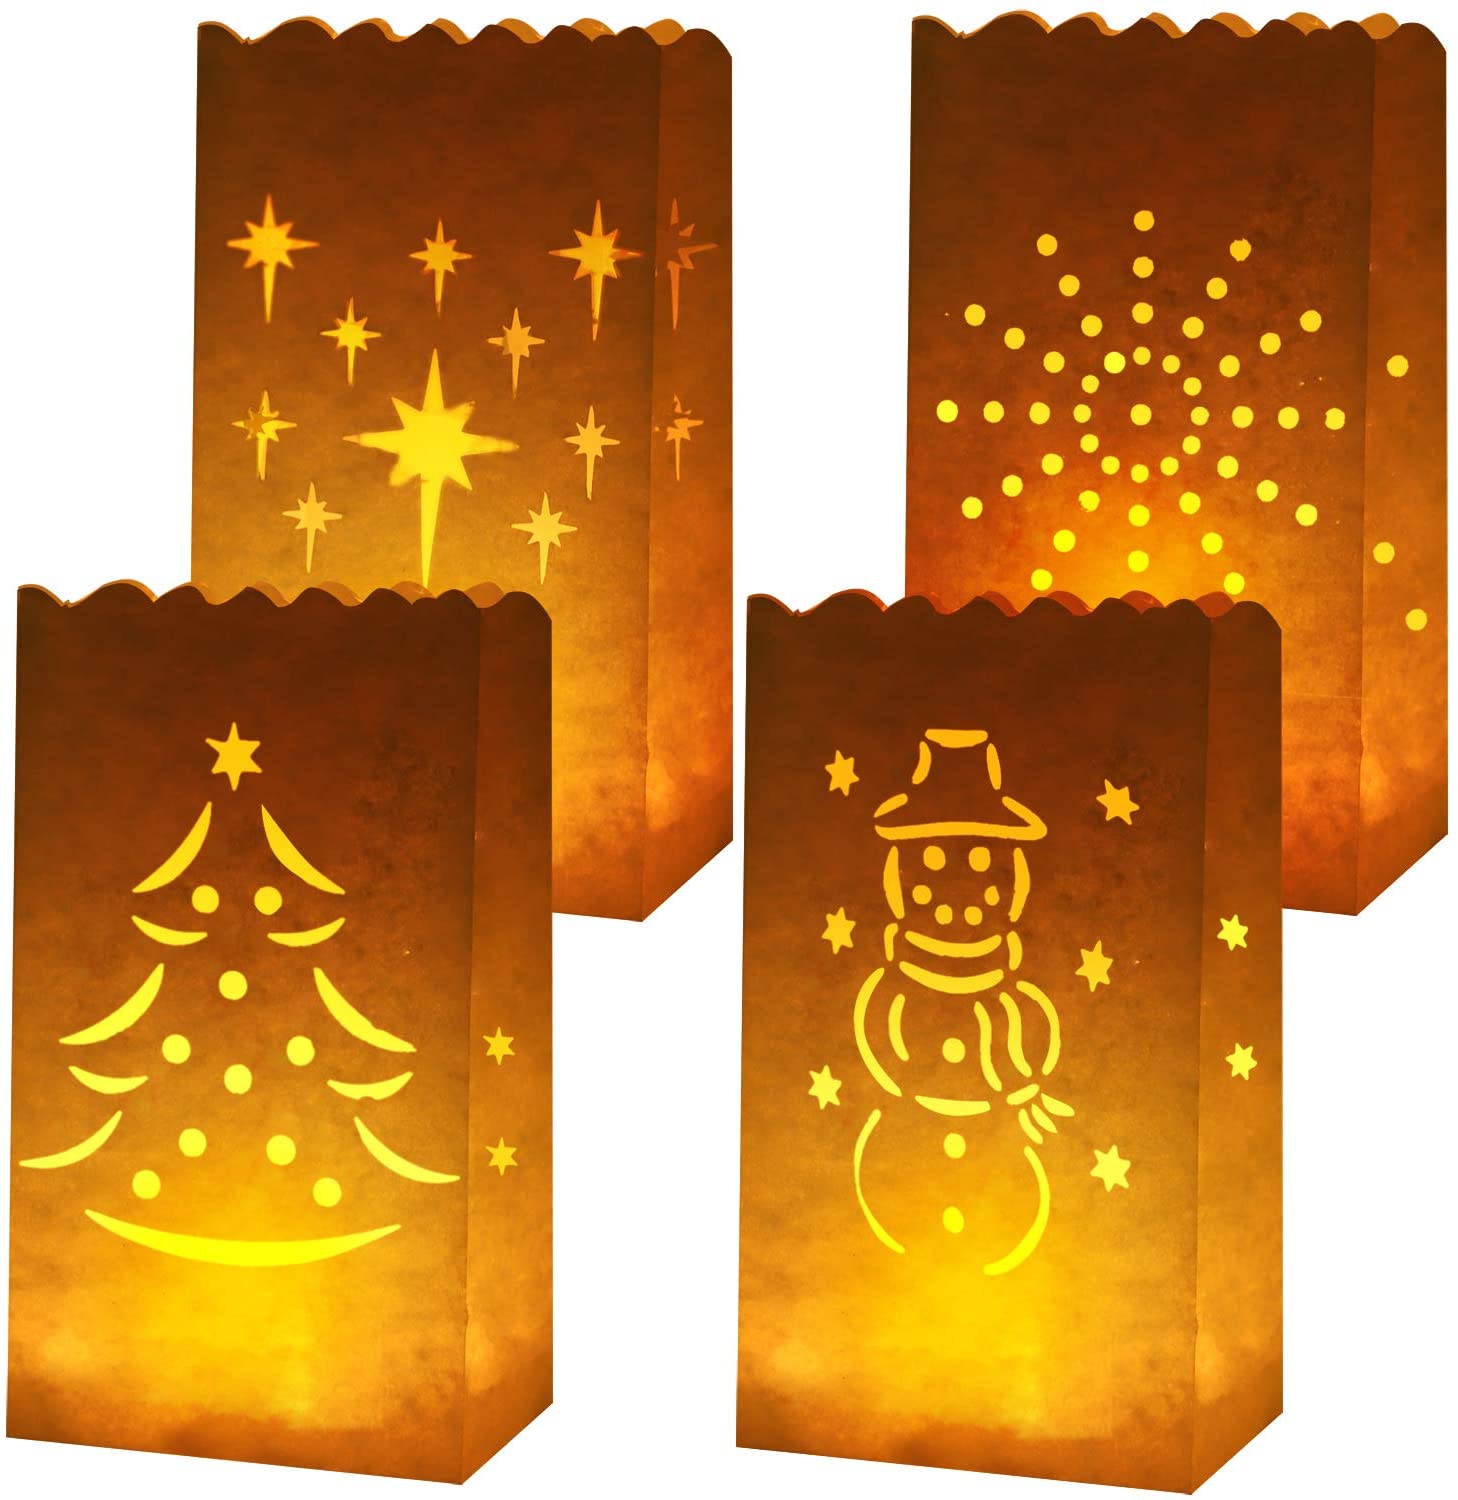 Aneco 72 Pieces Stars Design White Luminary Bags Paper Lantern Bags Flame Resistant Luminary Bags Tealight Candle Holders for Home Outdoor Christmas Party Decoration 